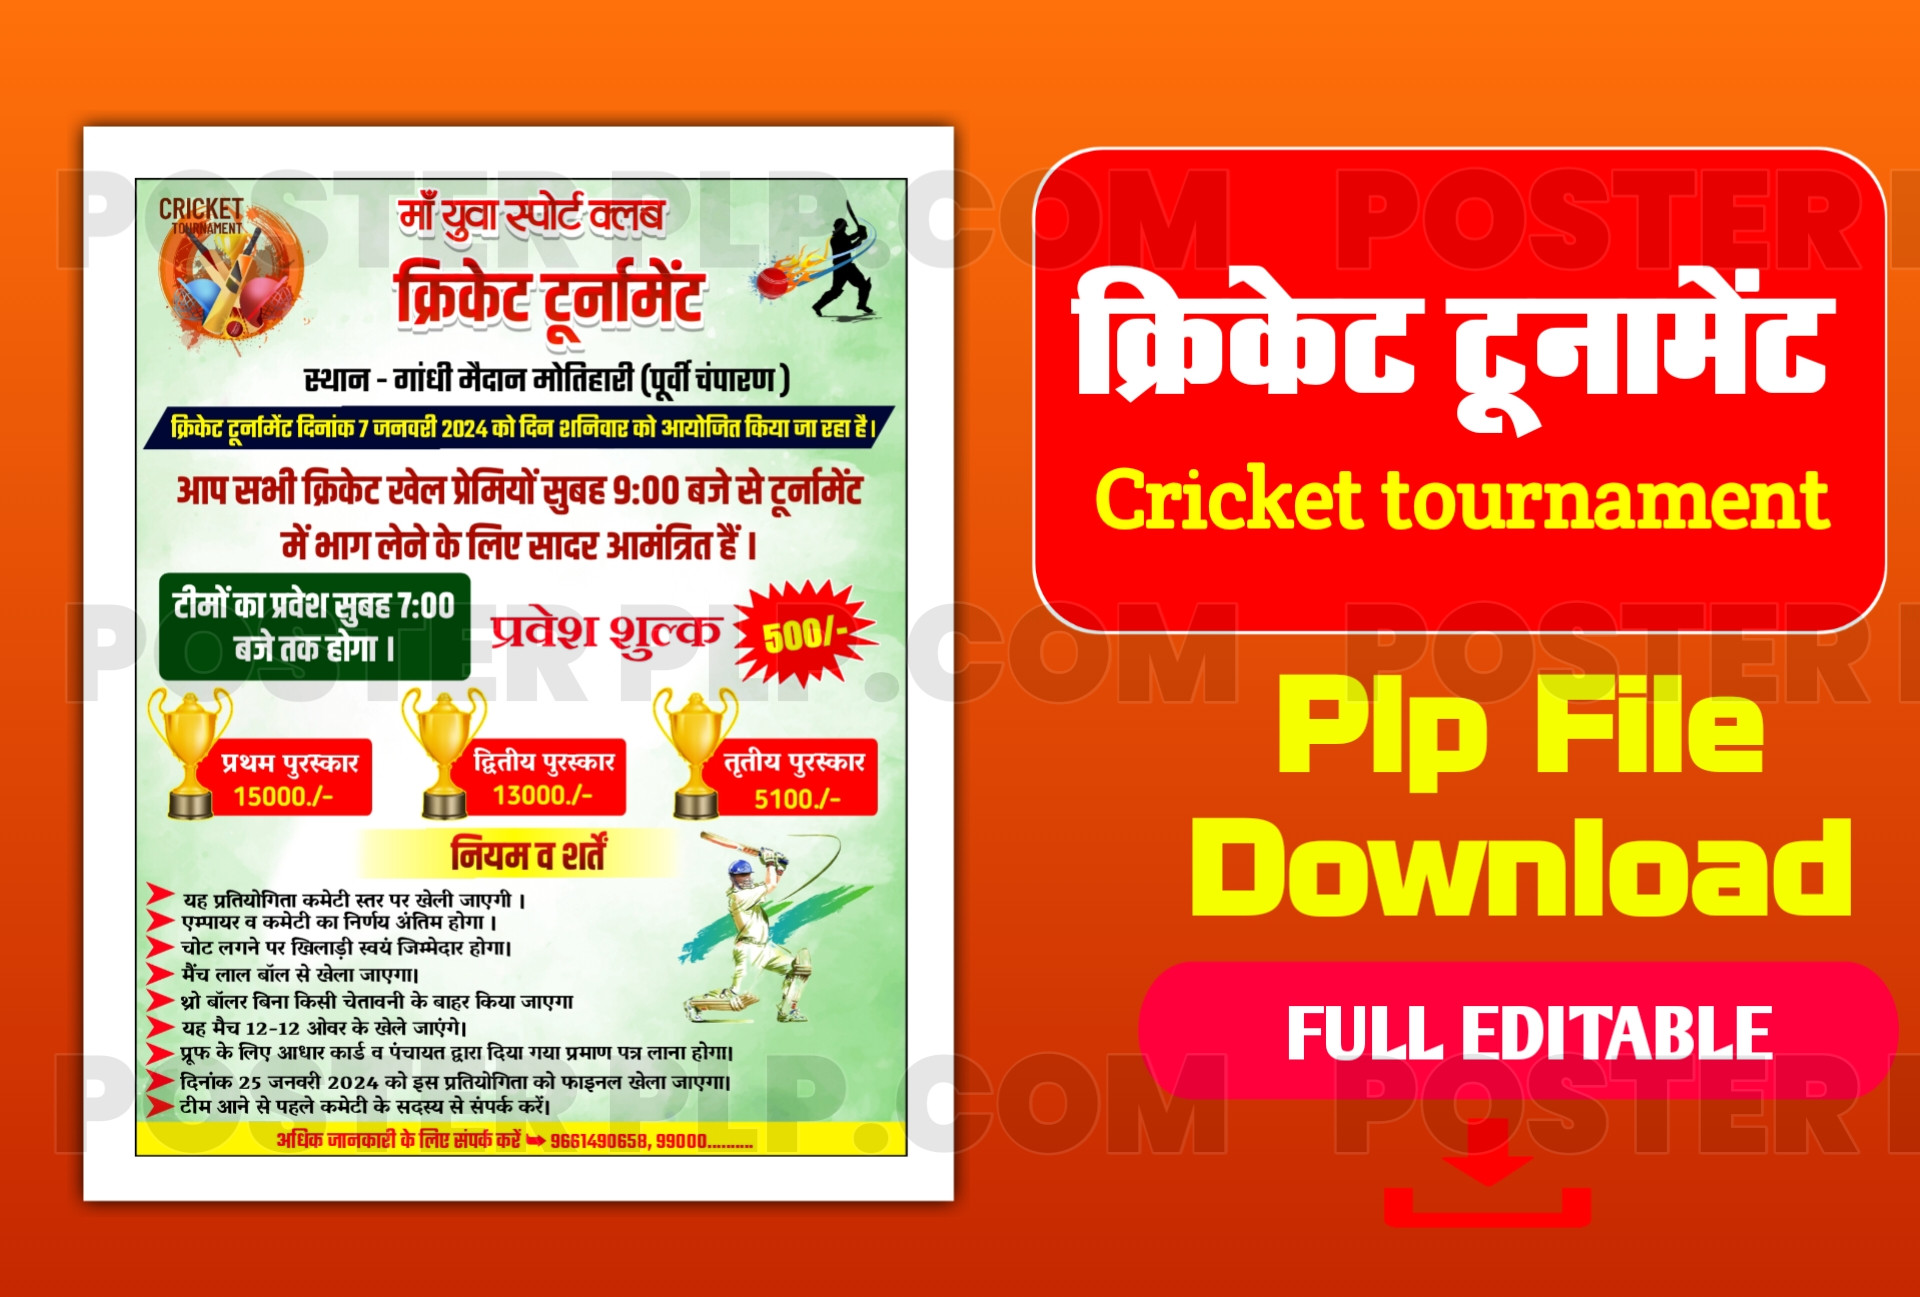 cricket tournament poster plp file download| cricket tournament banner editing plp